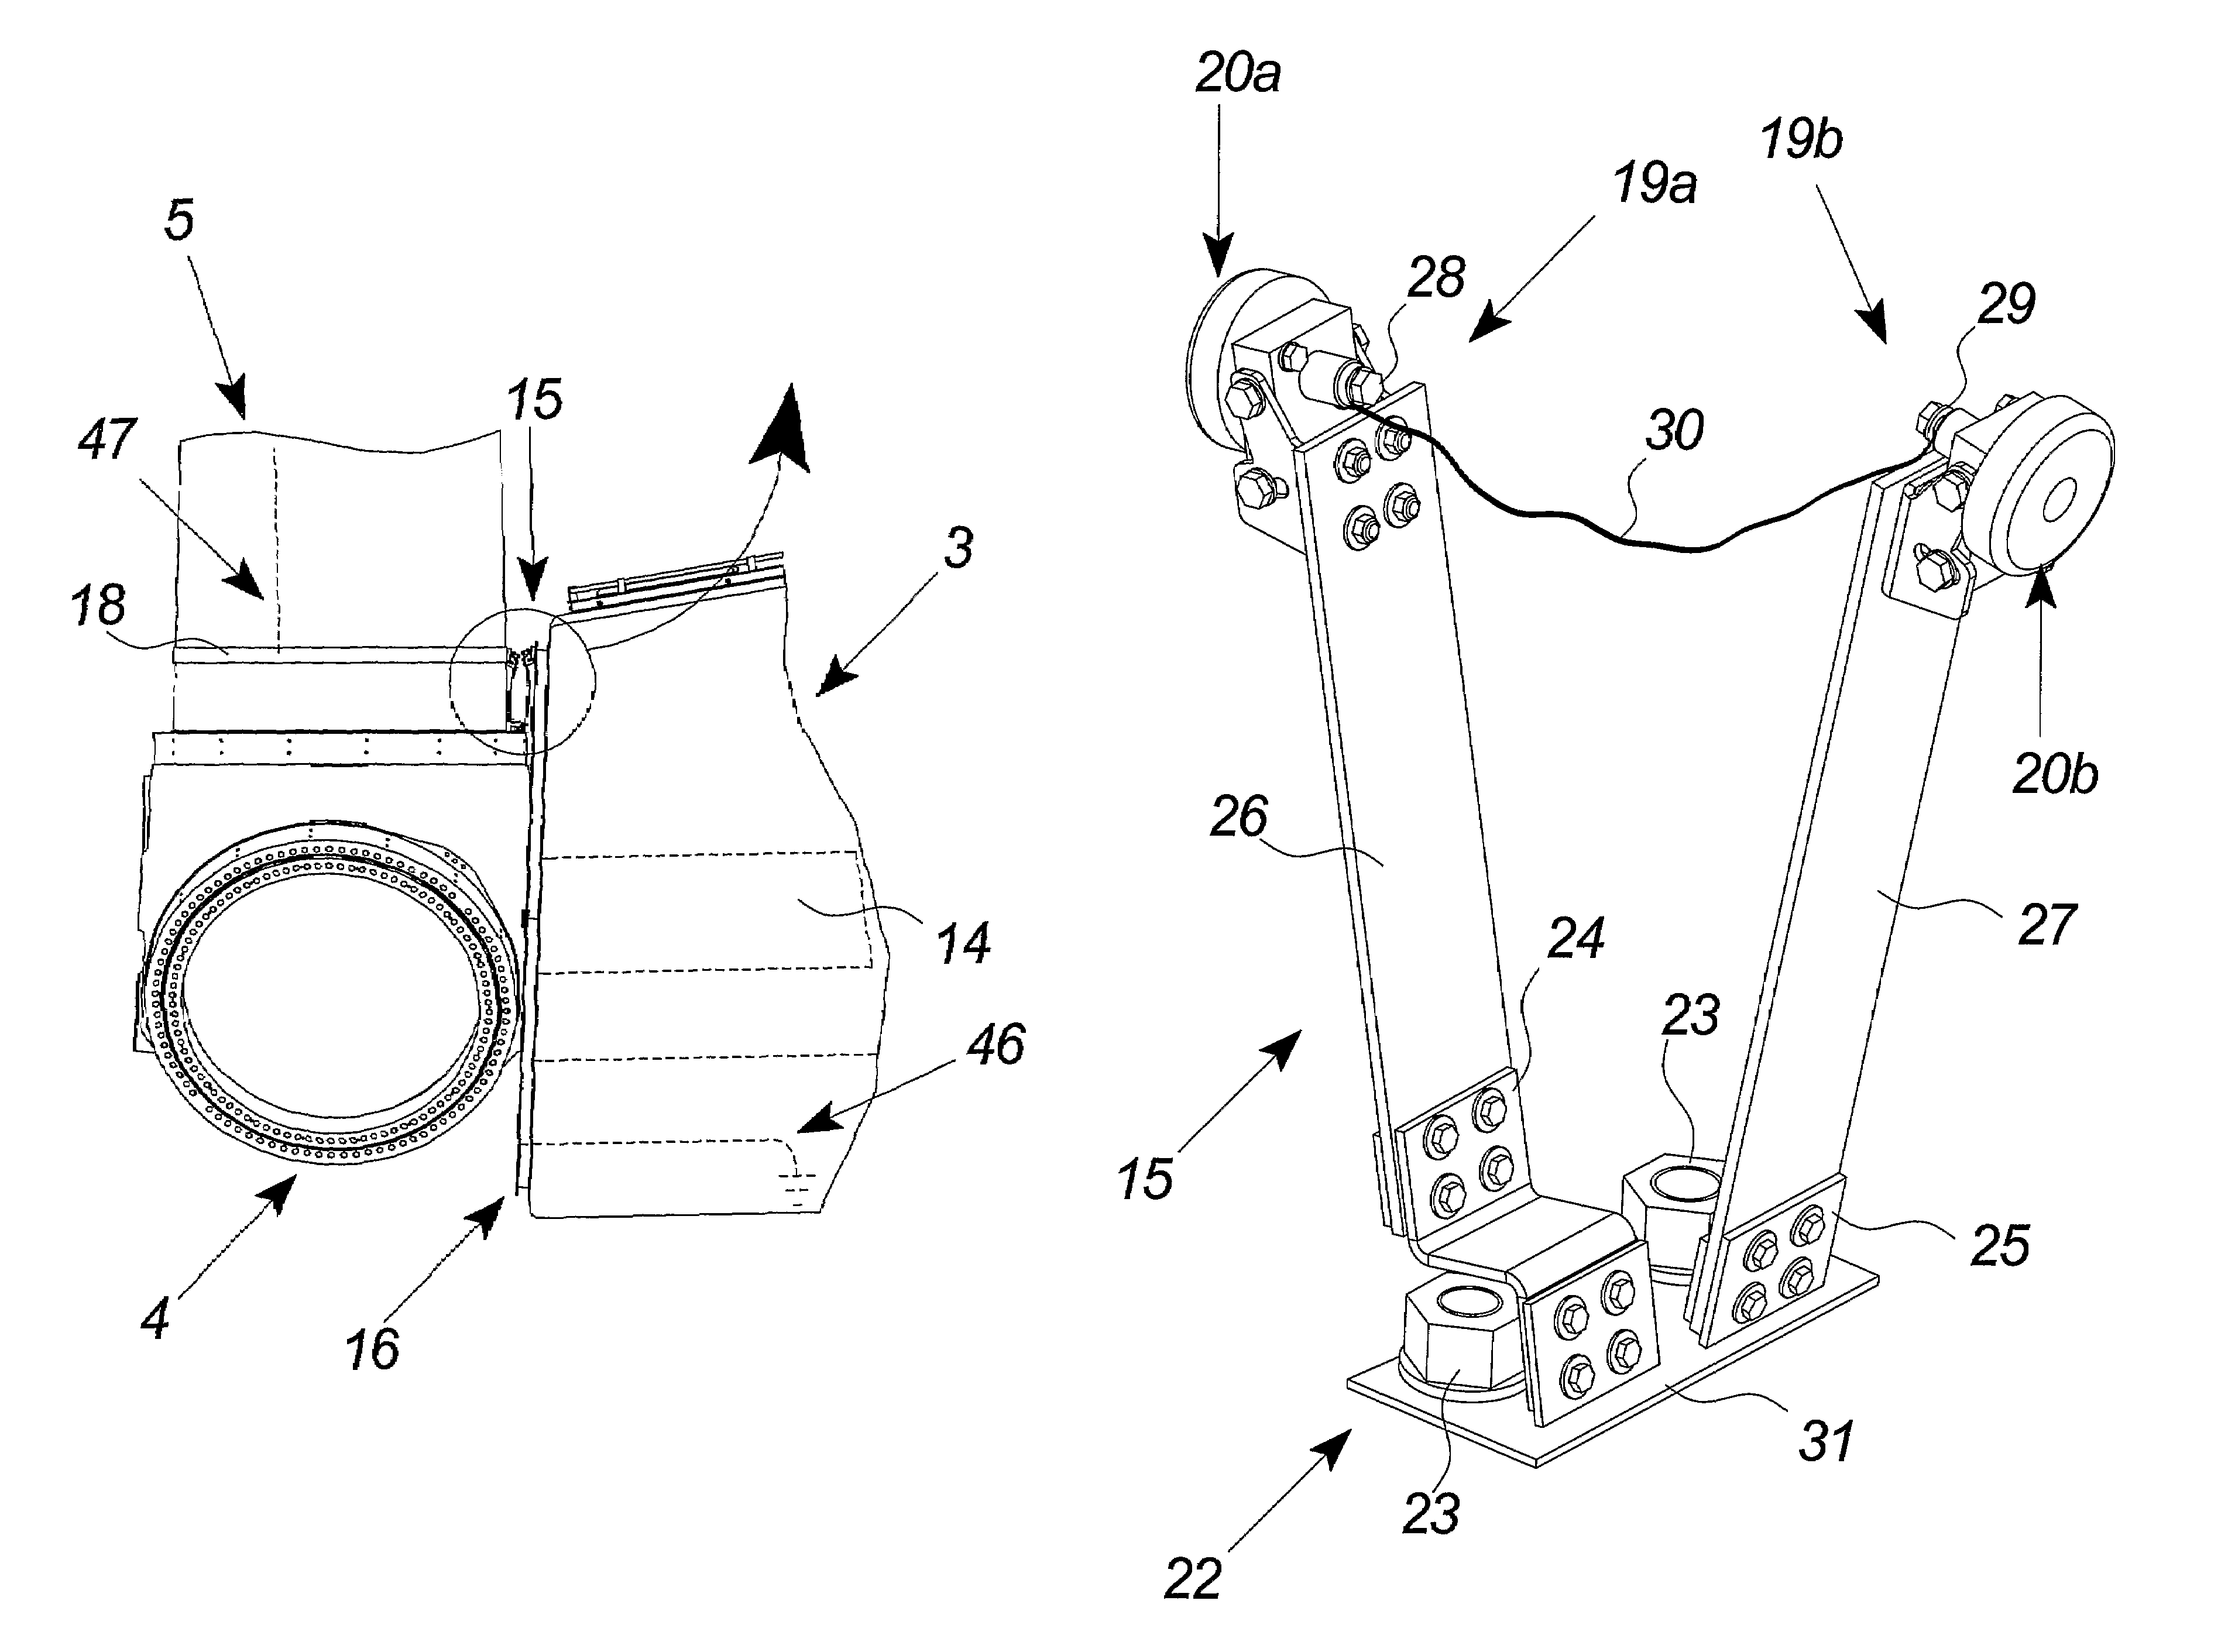 Wind turbine lightning connection means method and use hereof